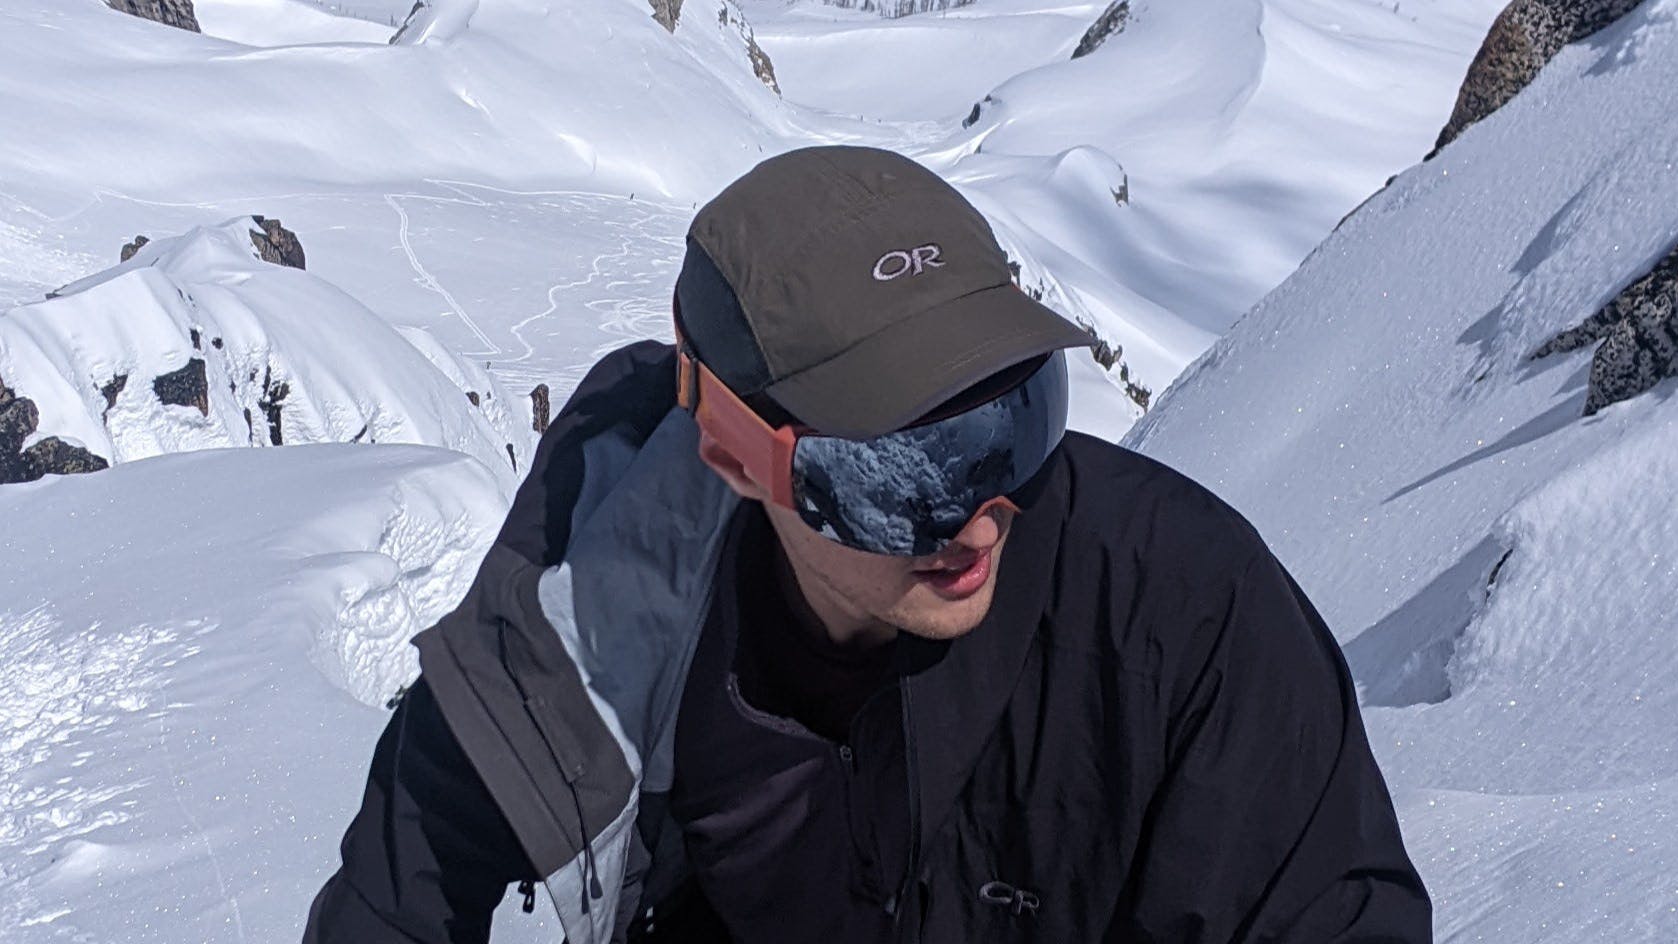 A skier hiking up a snowy area in the Smith I/O MAG Goggles.